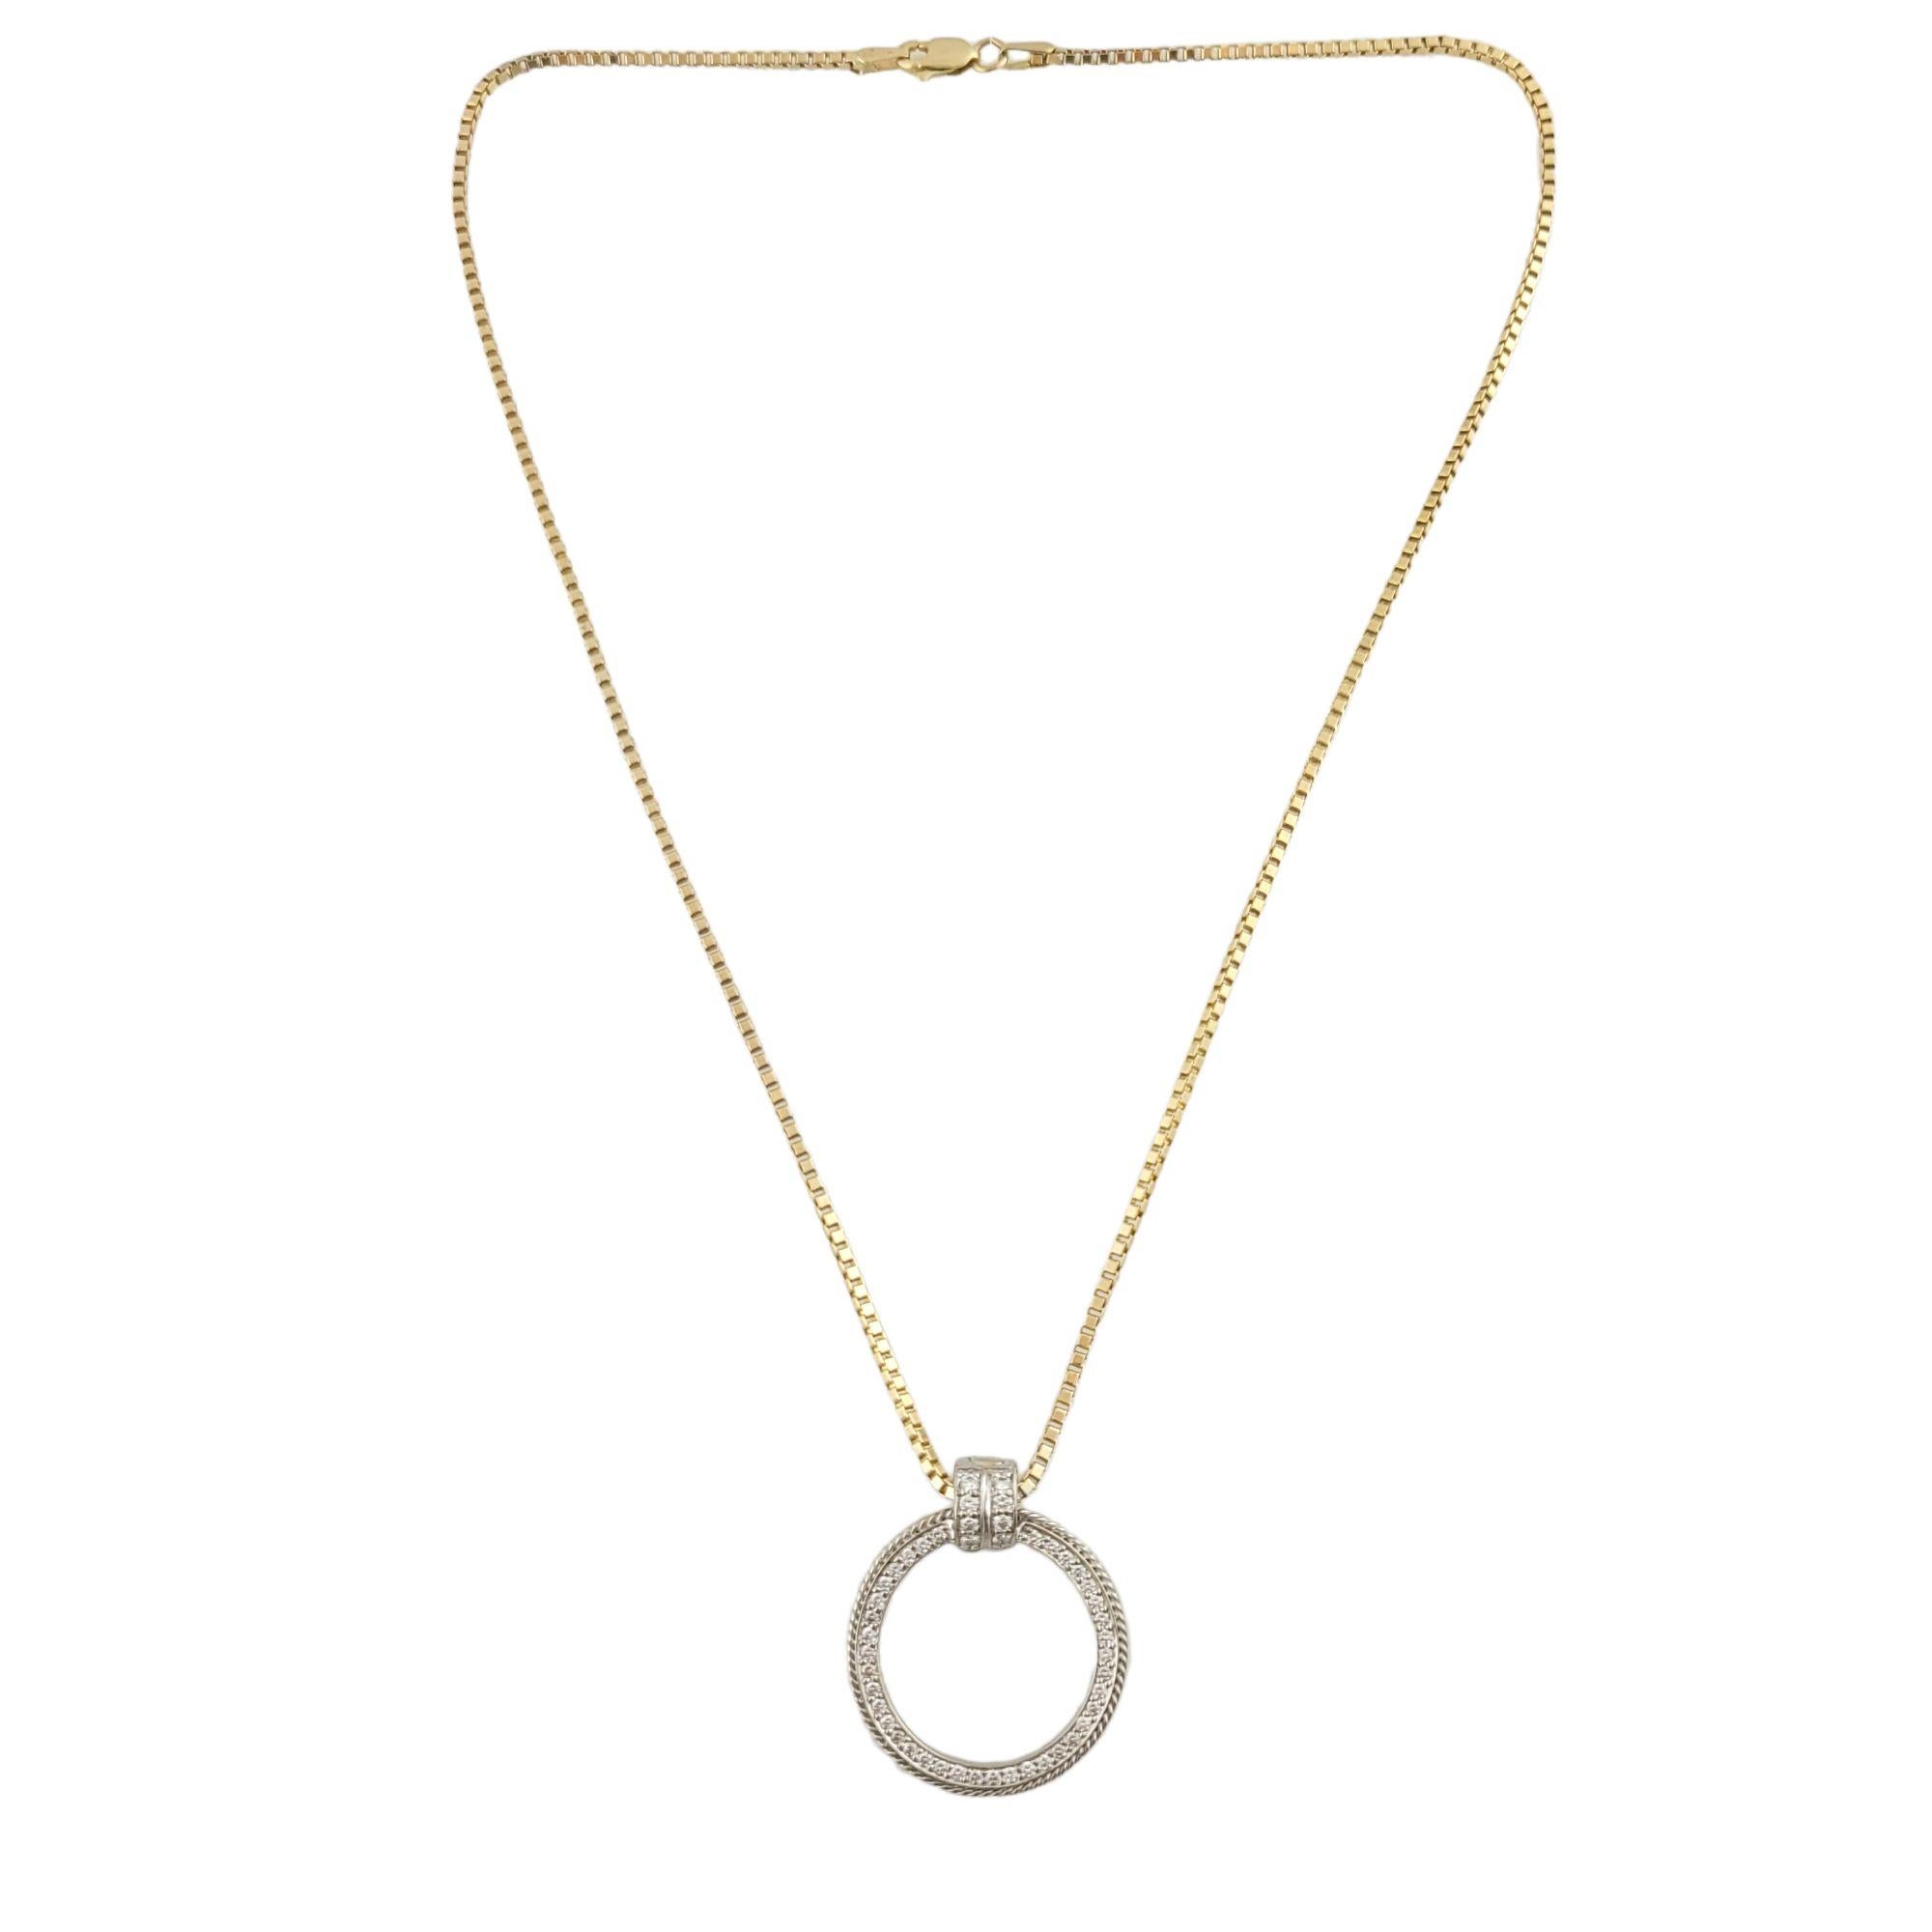 Vintage 14K White Gold Diamond Circle Pendant on a 14K Yellow Gold Chain

This gorgeous 14K white gold circle pendant is decorated with 46 sparkling round cut diamonds and it paired with a beautiful 14K yellow gold chain! Pendant has a detachable